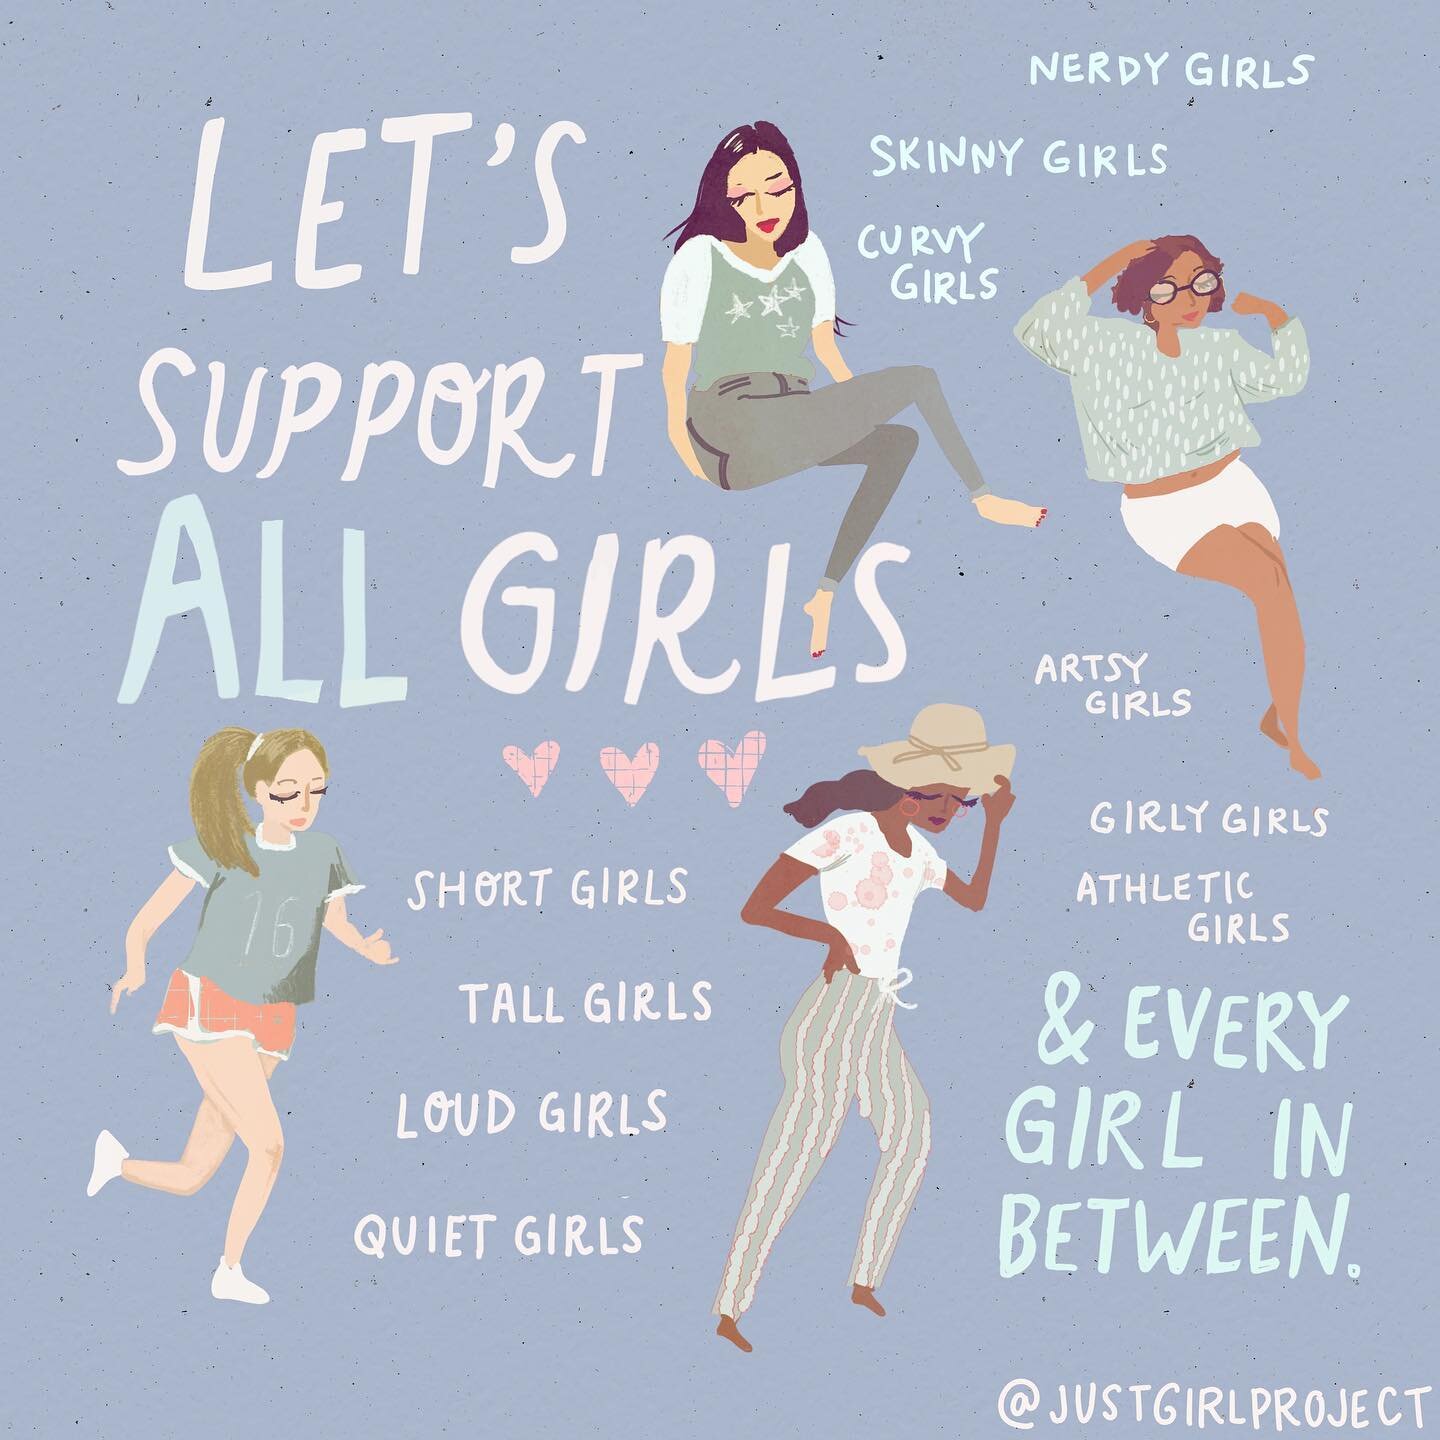 Happy #internationalwomensday - here is a drawing I made for @justgirlproject a while ago that feels appropriate! Feel so lucky to have so many inspiring women in my life ⚡️✨💥 
.
.
.
#internationalwomensday #justgirlproject #girlpower #illustration 